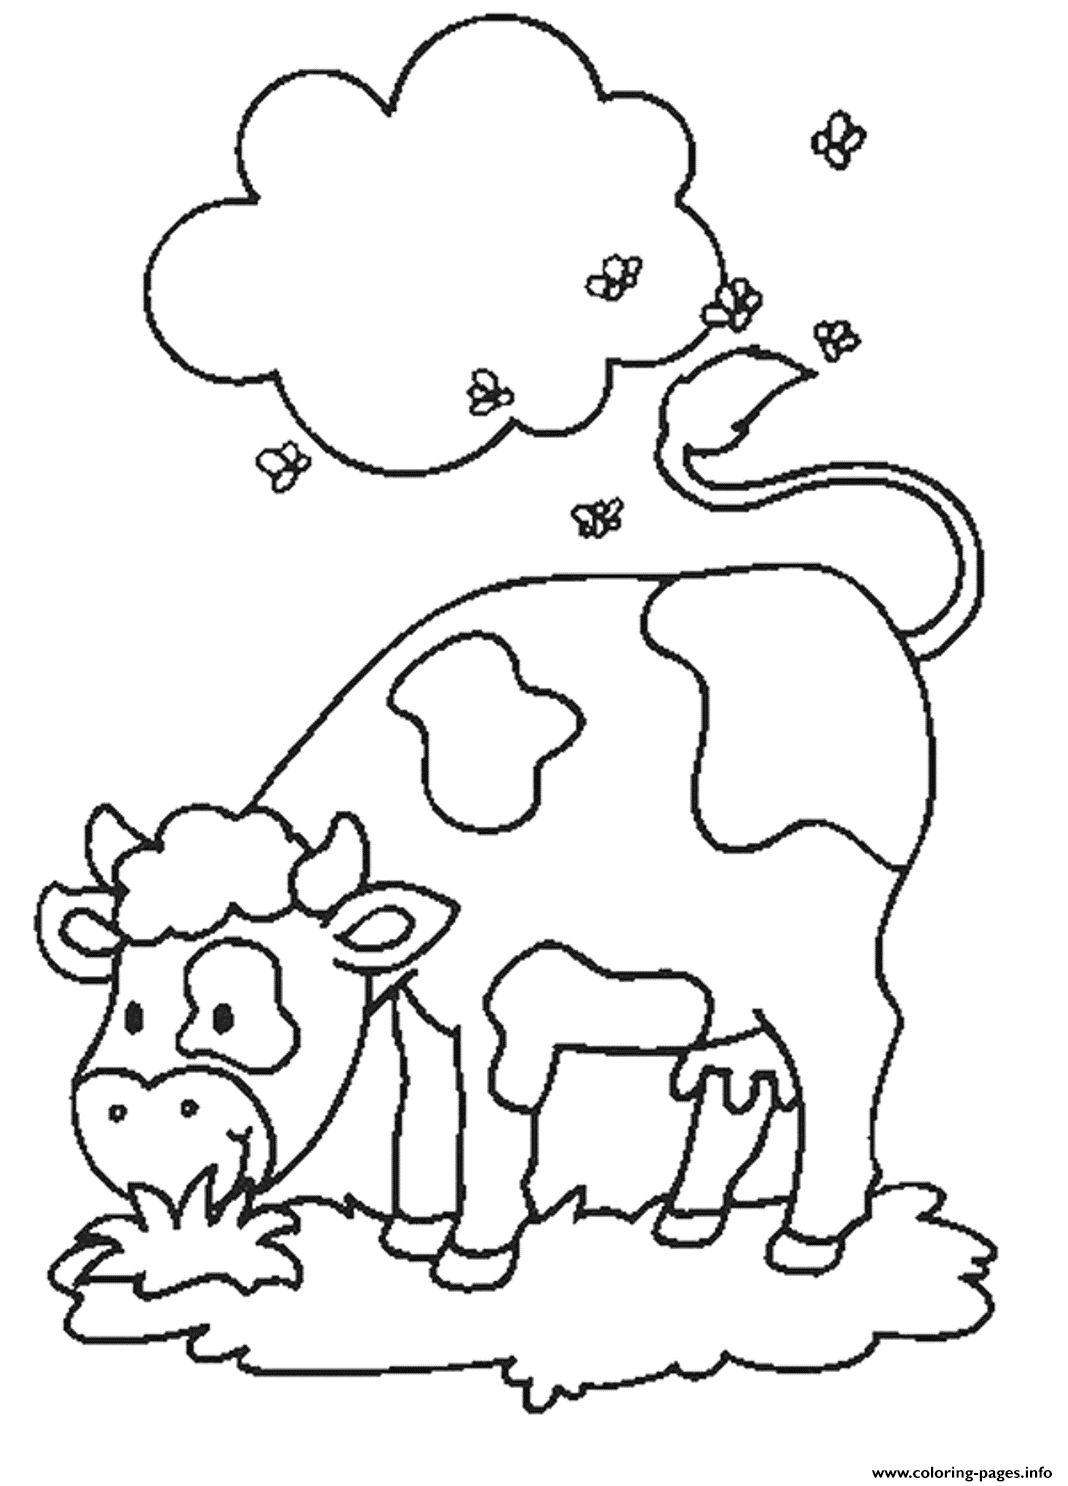 Cow S For Kids91b3 coloring